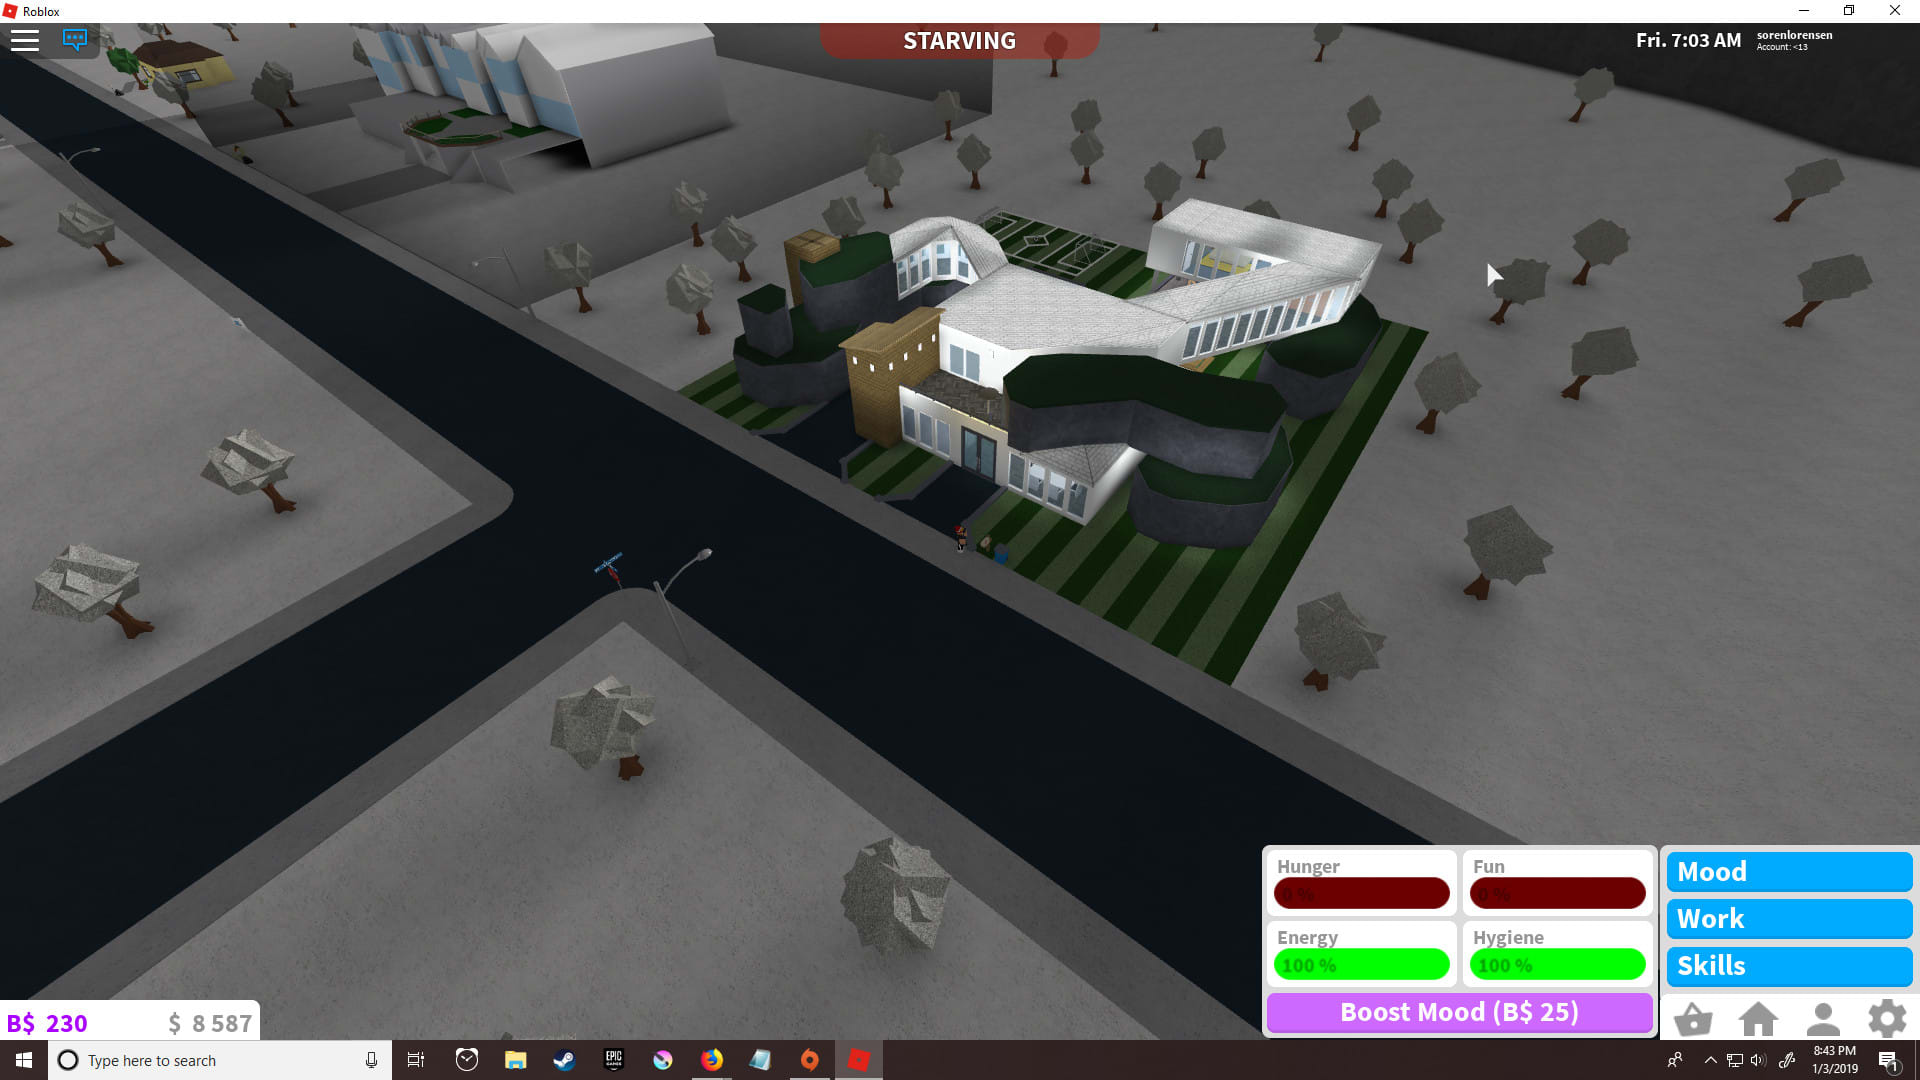 Play Roblox With You Or Build A House In Bloxburg By Sorenlorensen - play roblox online bloxburg